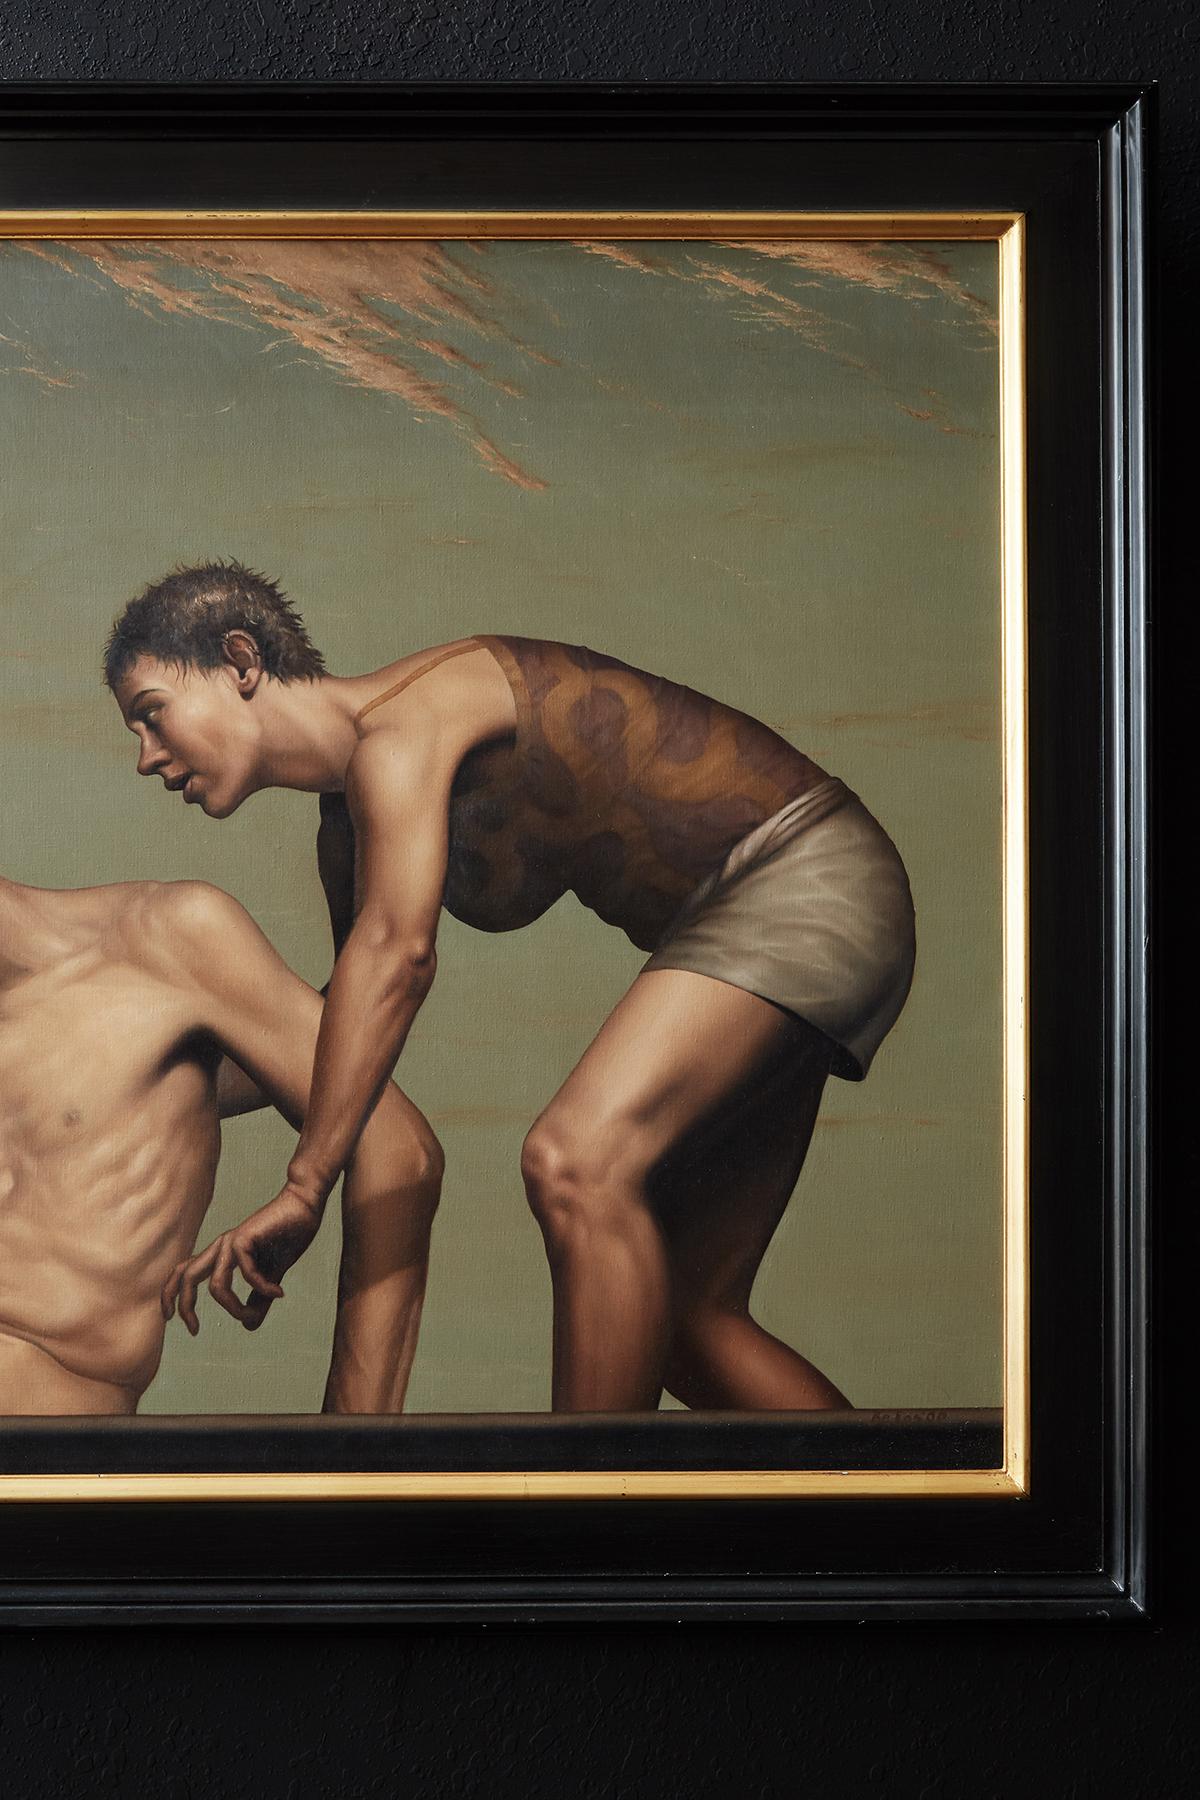 Extraordinary oil on linen painting by Aleksander Balos (b. 1970 Polish) titled Acceptance. Painting measures 66 inches wide and 33 inches high set in an ebonized frame with gilt trim. Gallery label affixed verso. Signed on bottom right.
